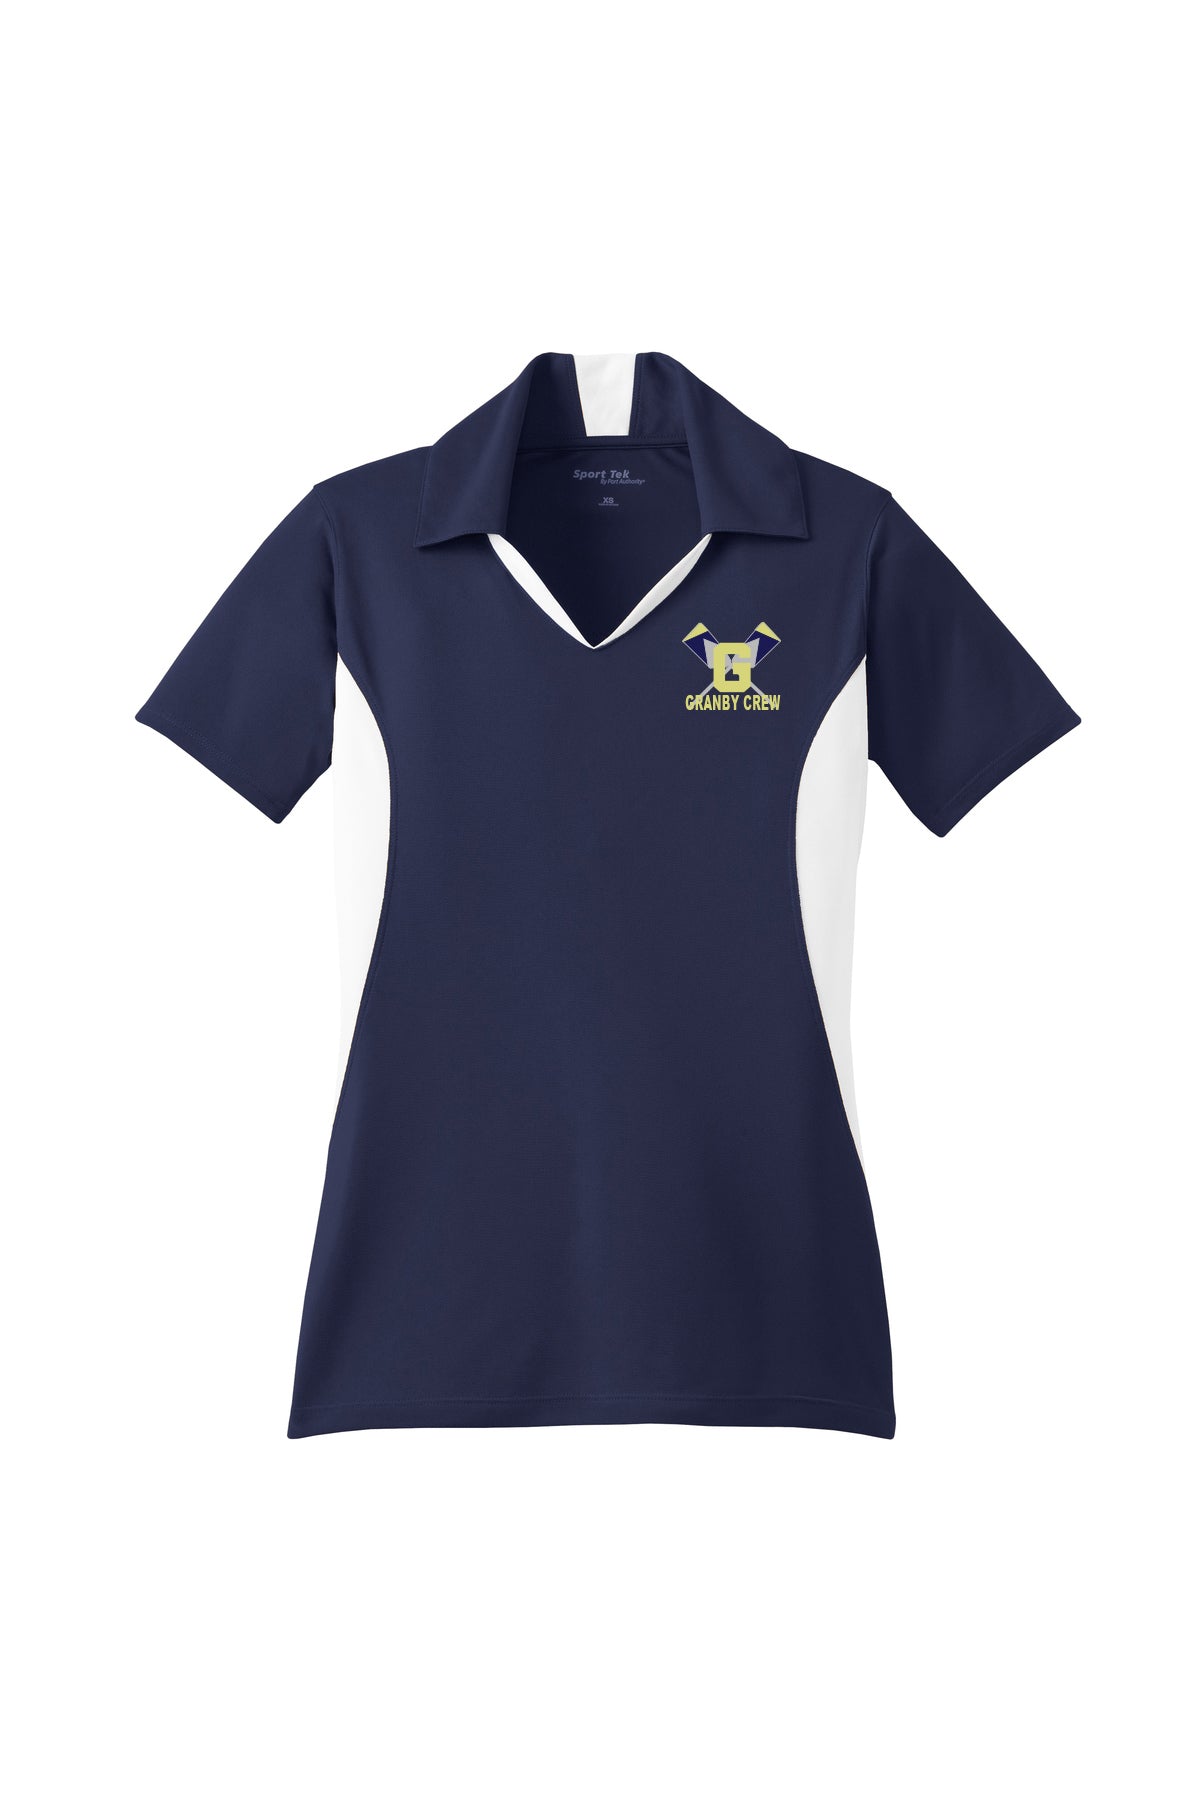 Granby Crew Embroidered Performance Ladies Polo